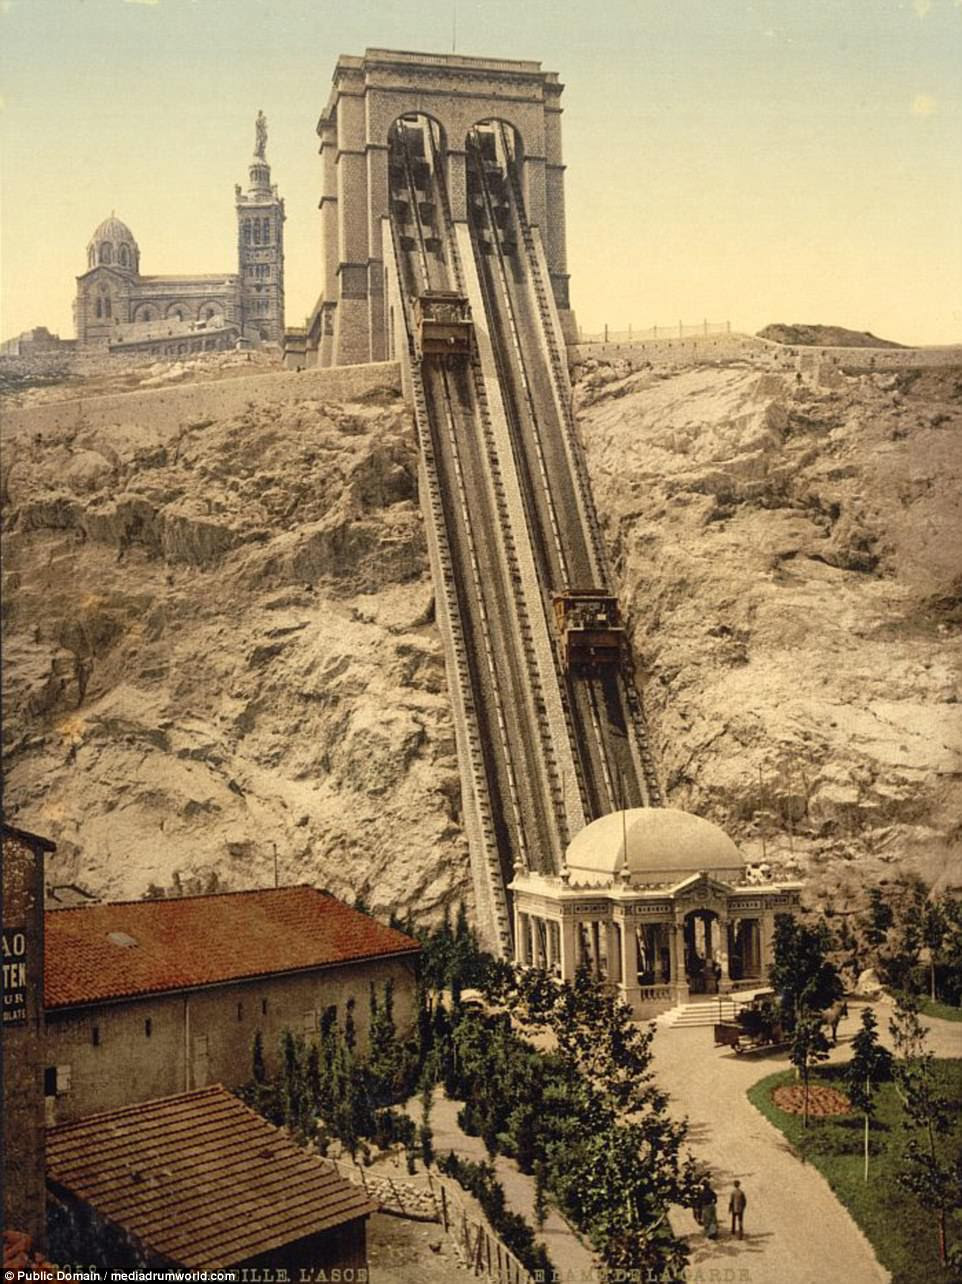 Paris is not the only city documented in the collection of pictures. They also show Marseille on the south coast and this cable railway